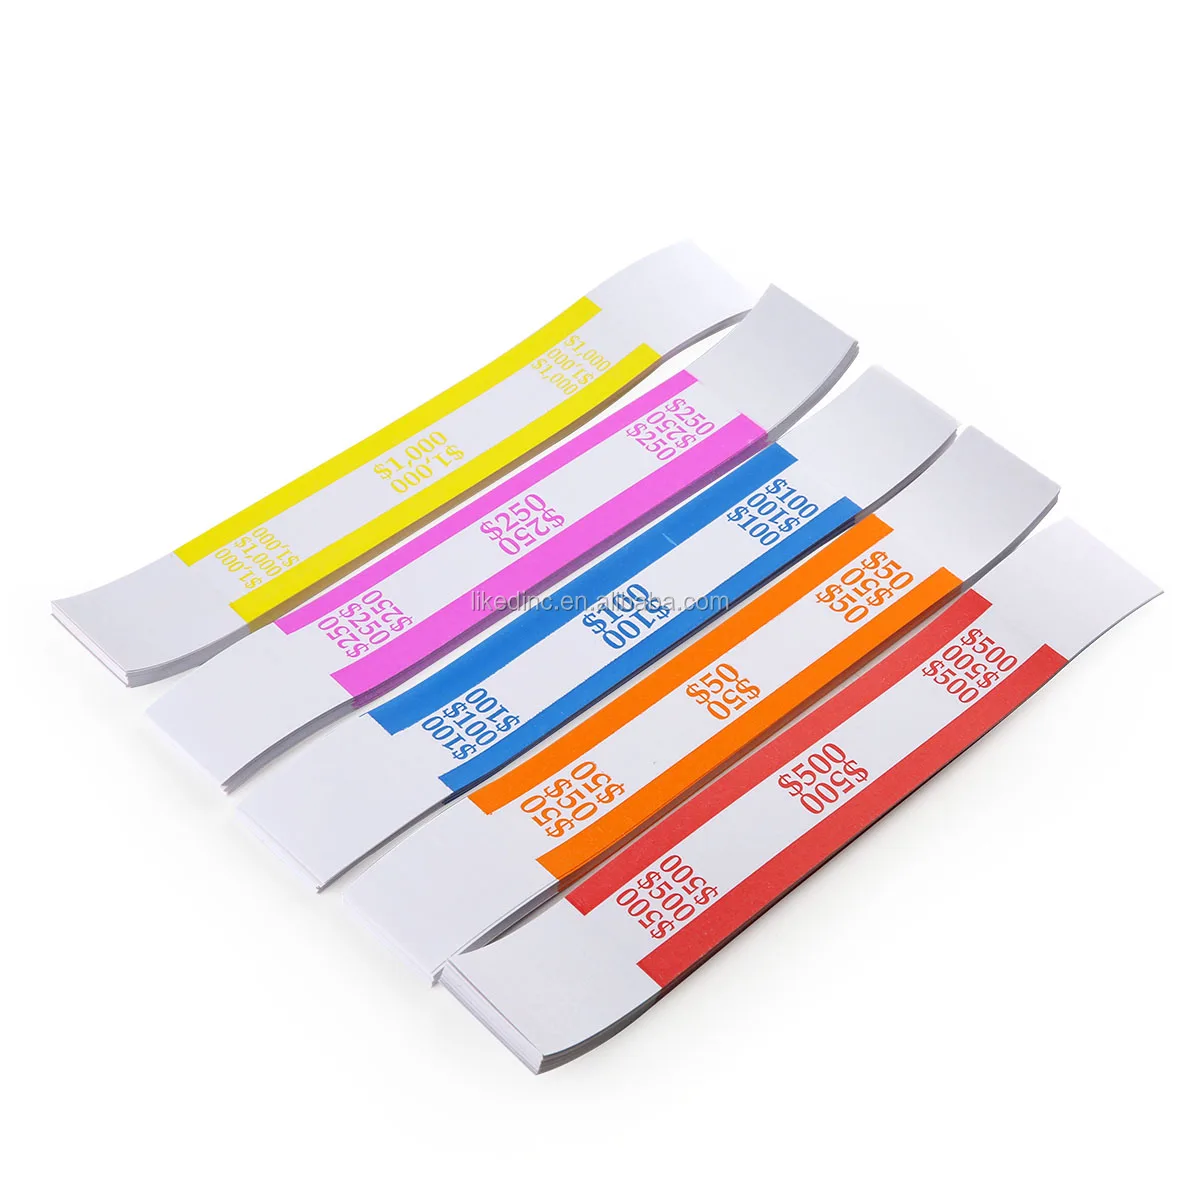 ABA Standard Colors Currency Straps $250 / Pink 7.5 x 1.15 Inches Money Bands to Organize Bills Self-Adhesive Bill Wrappers 